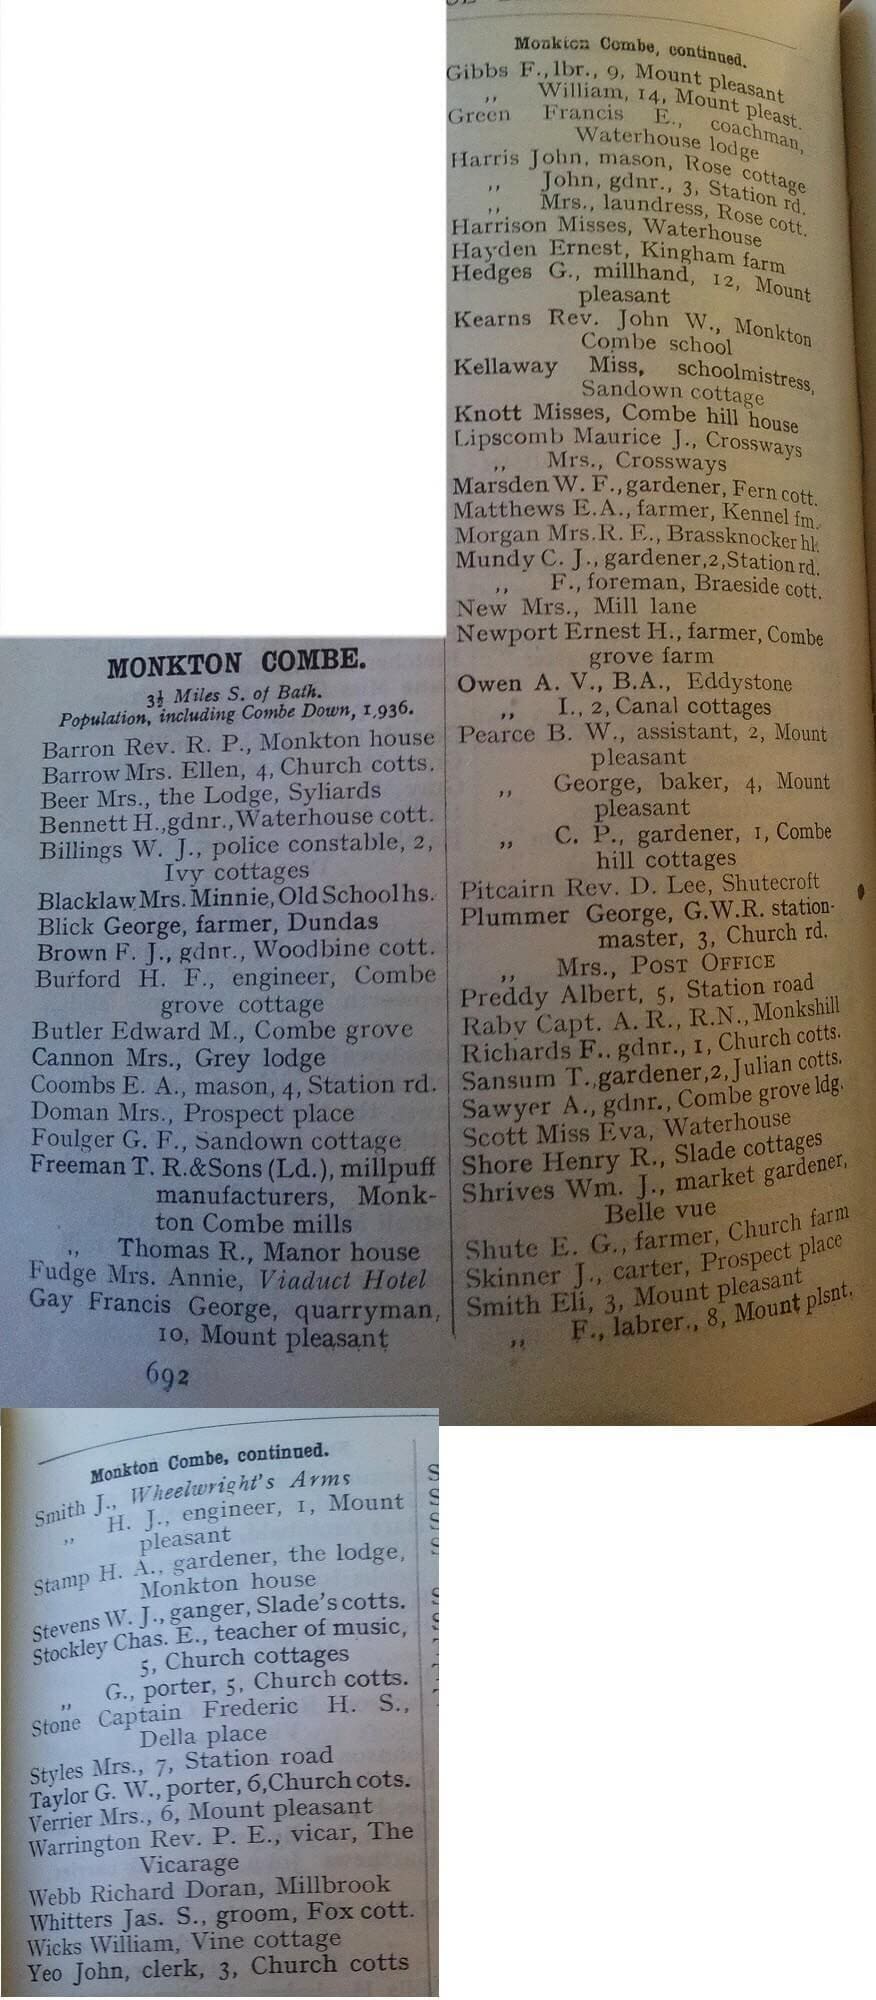 1920 Post Office Directory for Monkton Combe